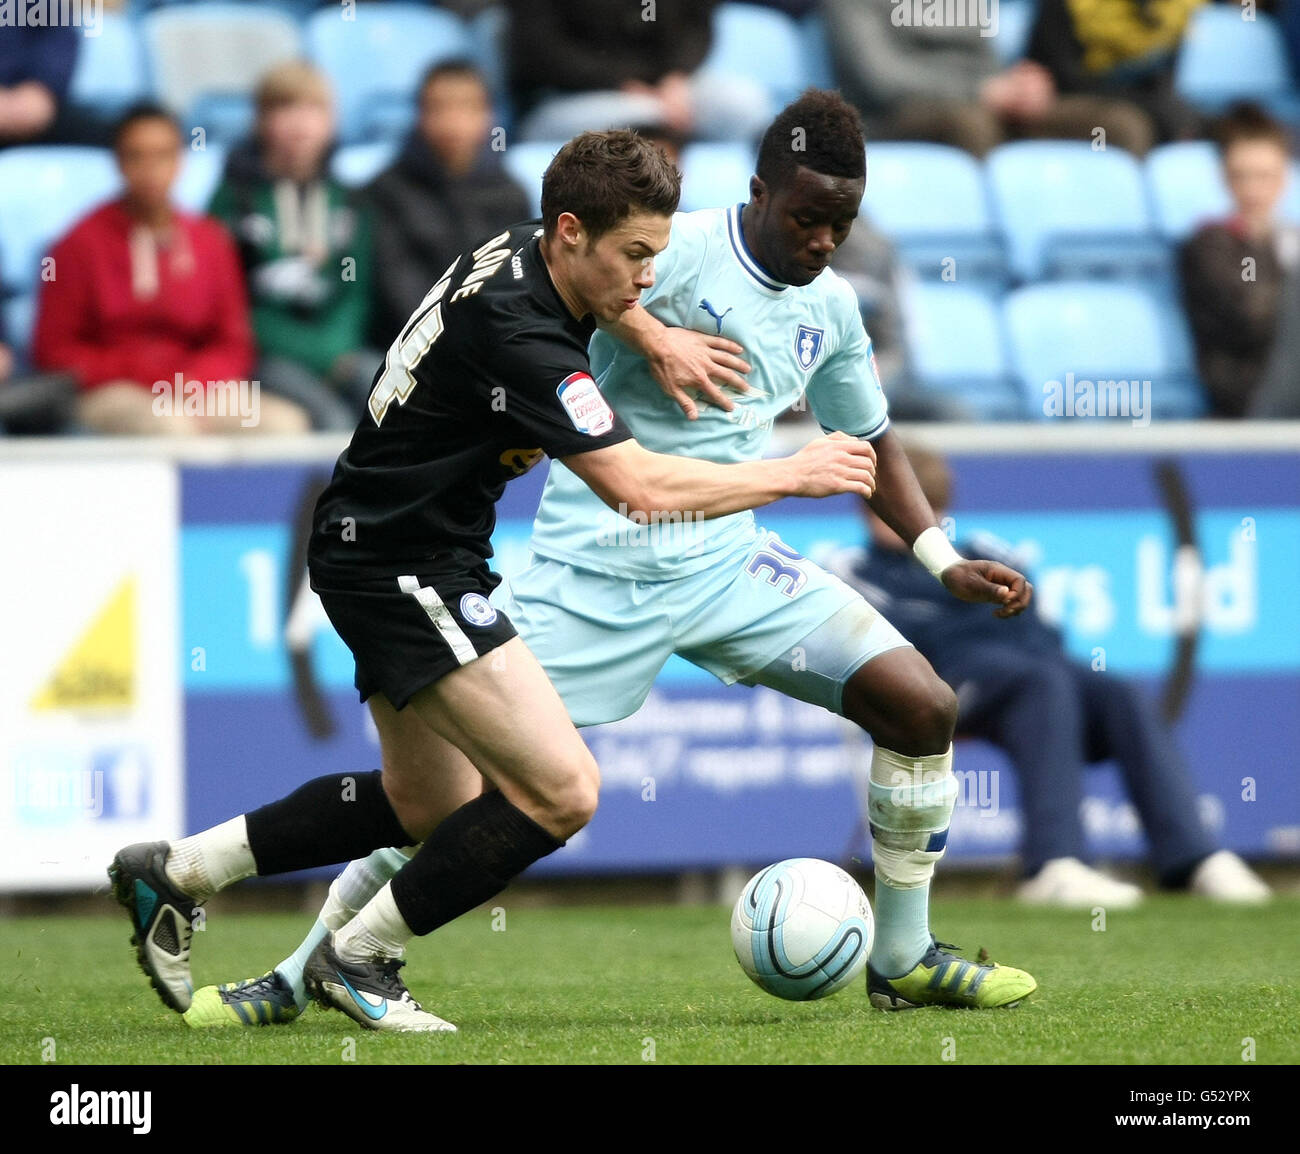 Coventry City's Gael Bigirimana and Peteborough United's Tommy Rowe during the npower Football League Championship match at the Ricoh Arena, Coventry. PRESS ASSOCIATION Photo. Picture date: Saturday April 7, 2012. Photo credit should read:PA Wire. RESTRICTIONS. Maximum 45 images during a match. No video emulation or promotion as 'live'. No use in games, competitions, merchandise, betting or single club/player services. No use with unofficial audio, video, data, fixtures or club/league logos. Stock Photo